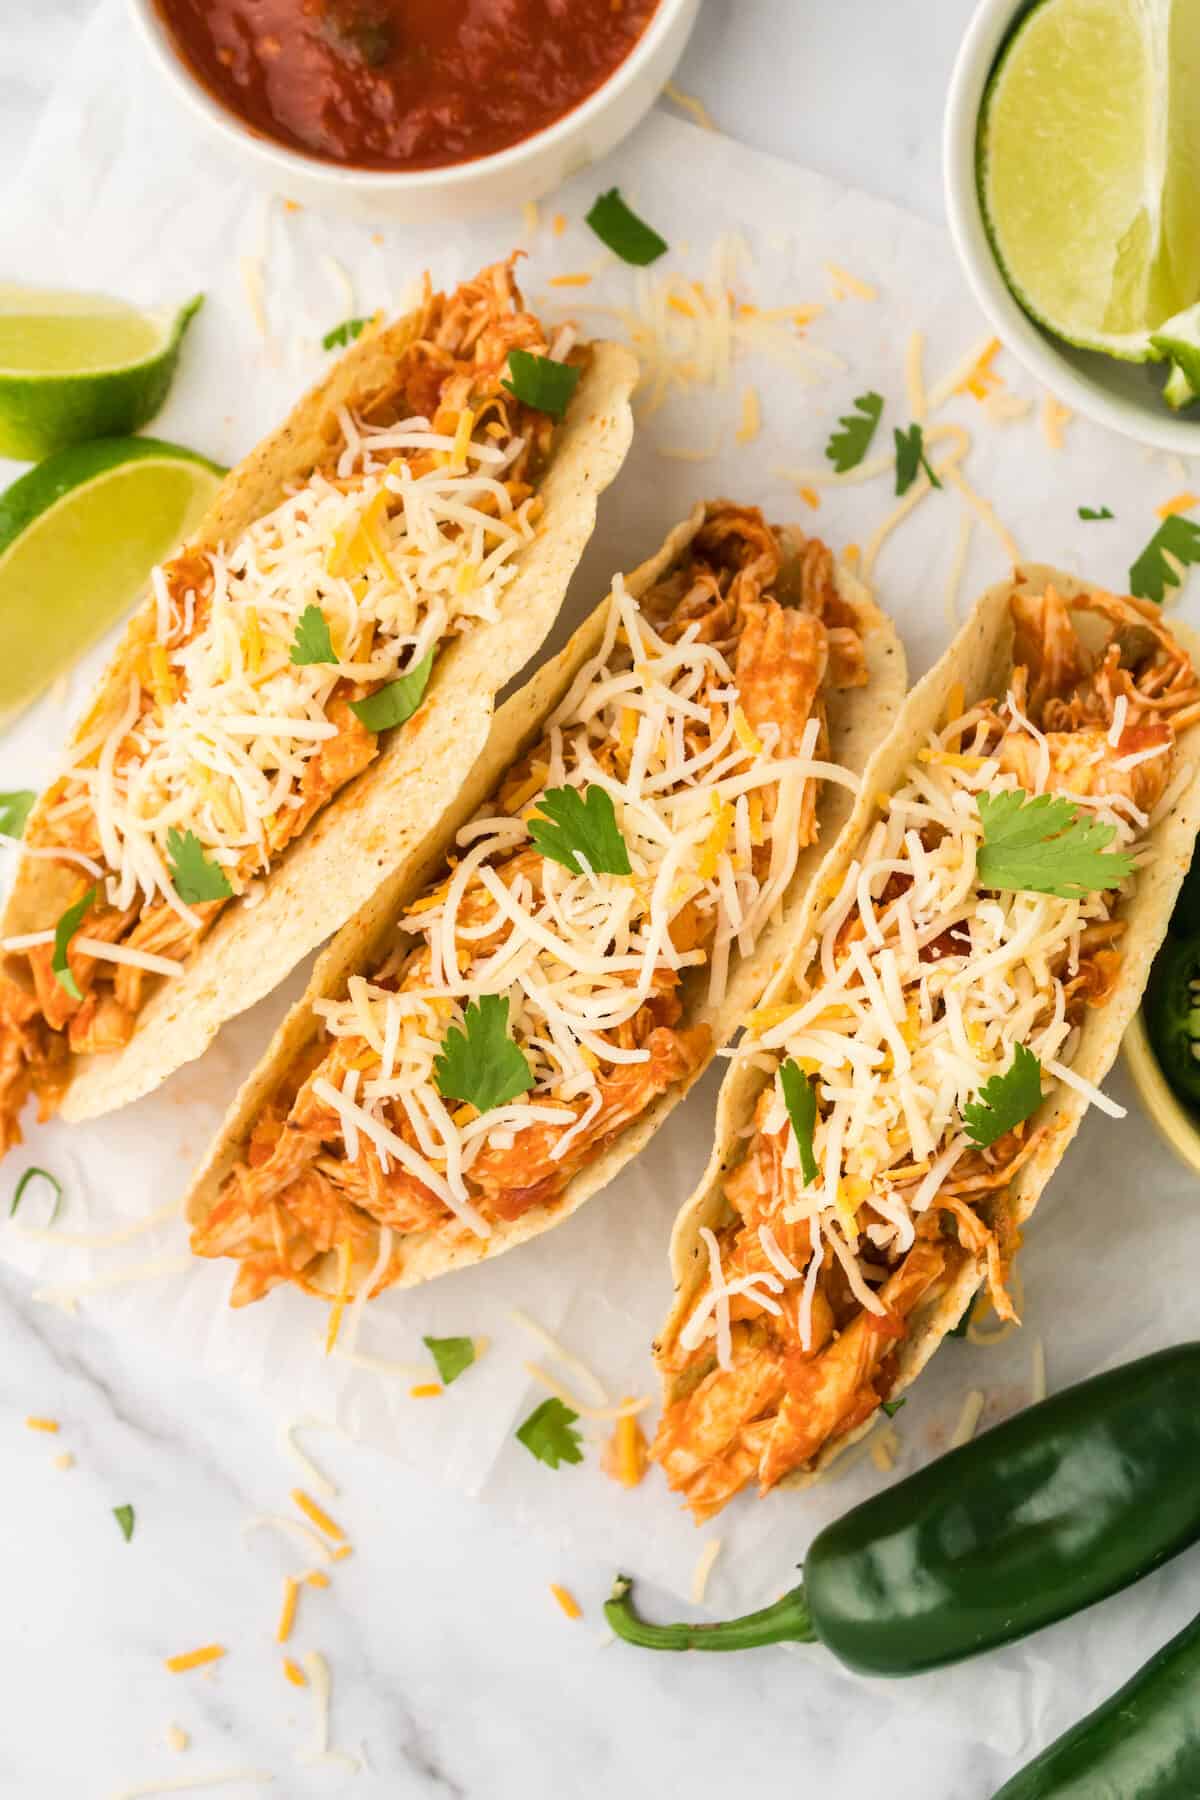 three shredded chicken tacos with cheese, cilantro, jalapeño and salsa garnishes.